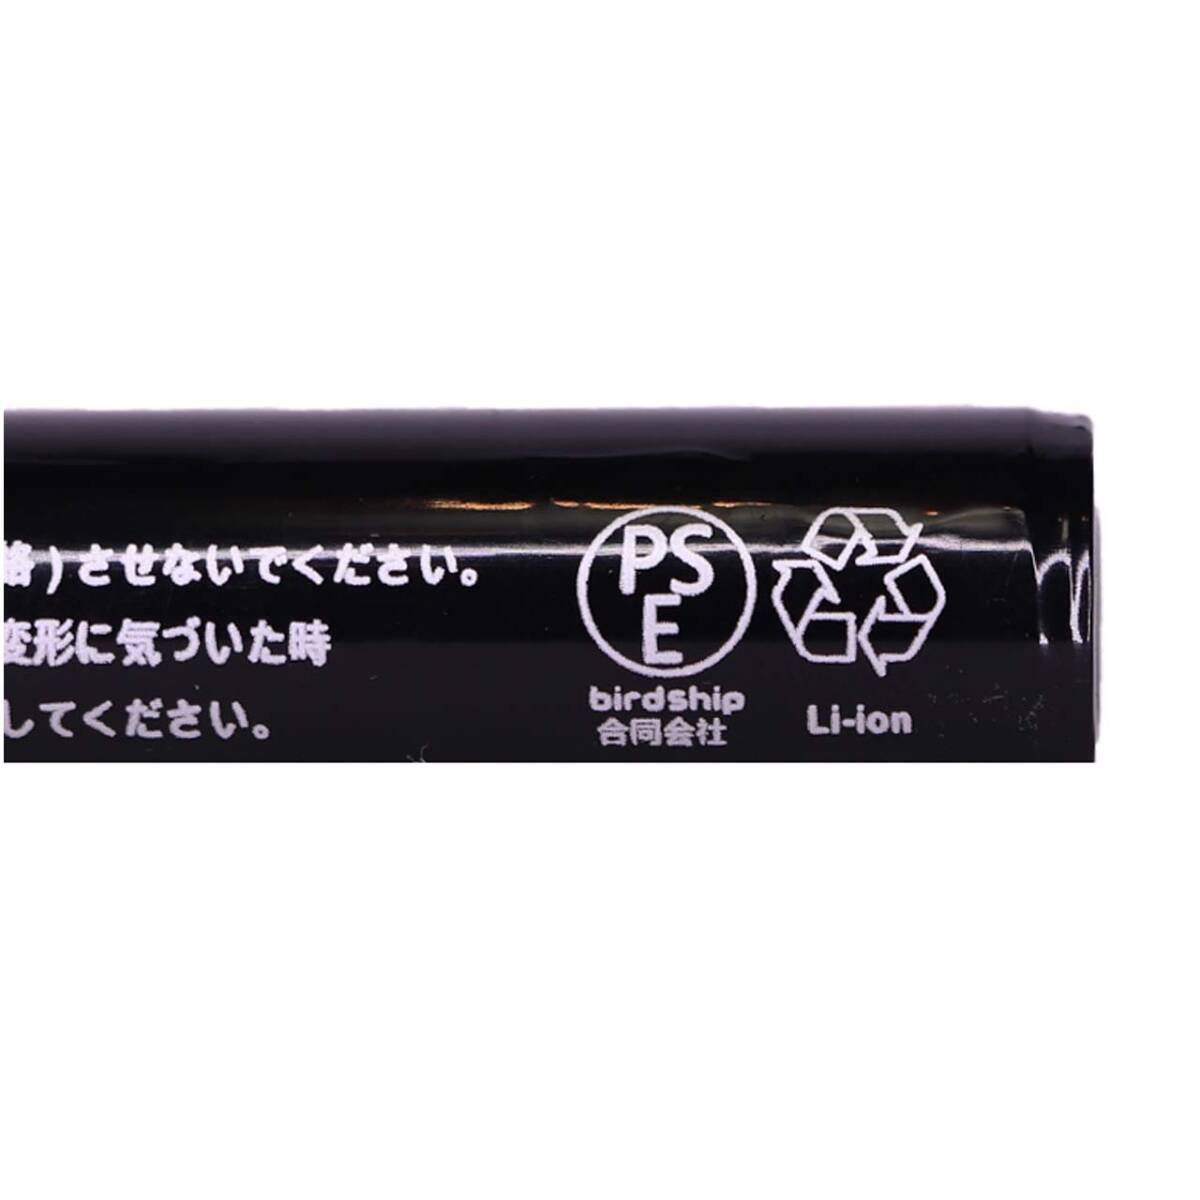 18650 lithium ion rechargeable battery battery PSE protection circuit flashlight head light handy light 2600mah 06